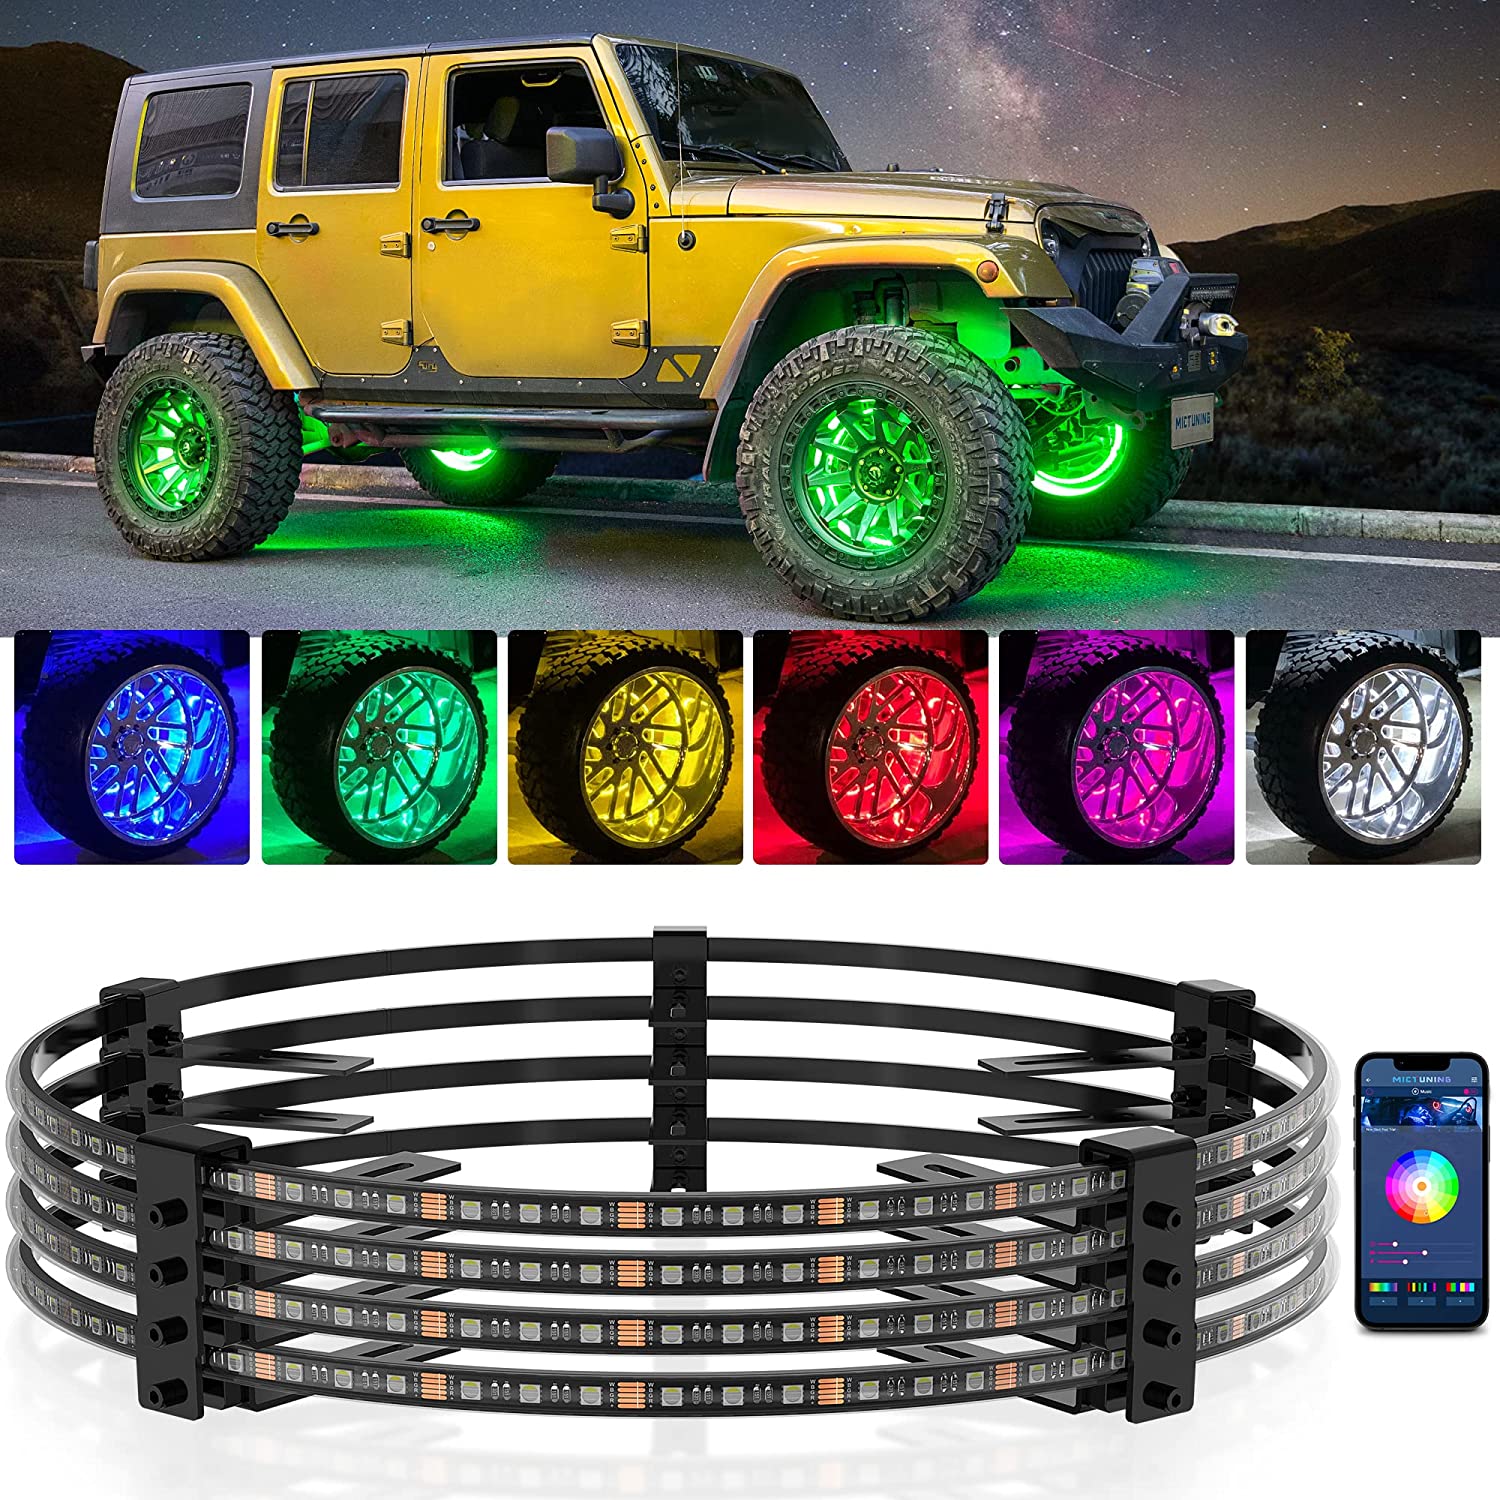 15.5″/17.5″ V1 RGBW LED Wheel Ring Lights Kit with APP Control, Pure Colors Neon Wheel Rim Lights